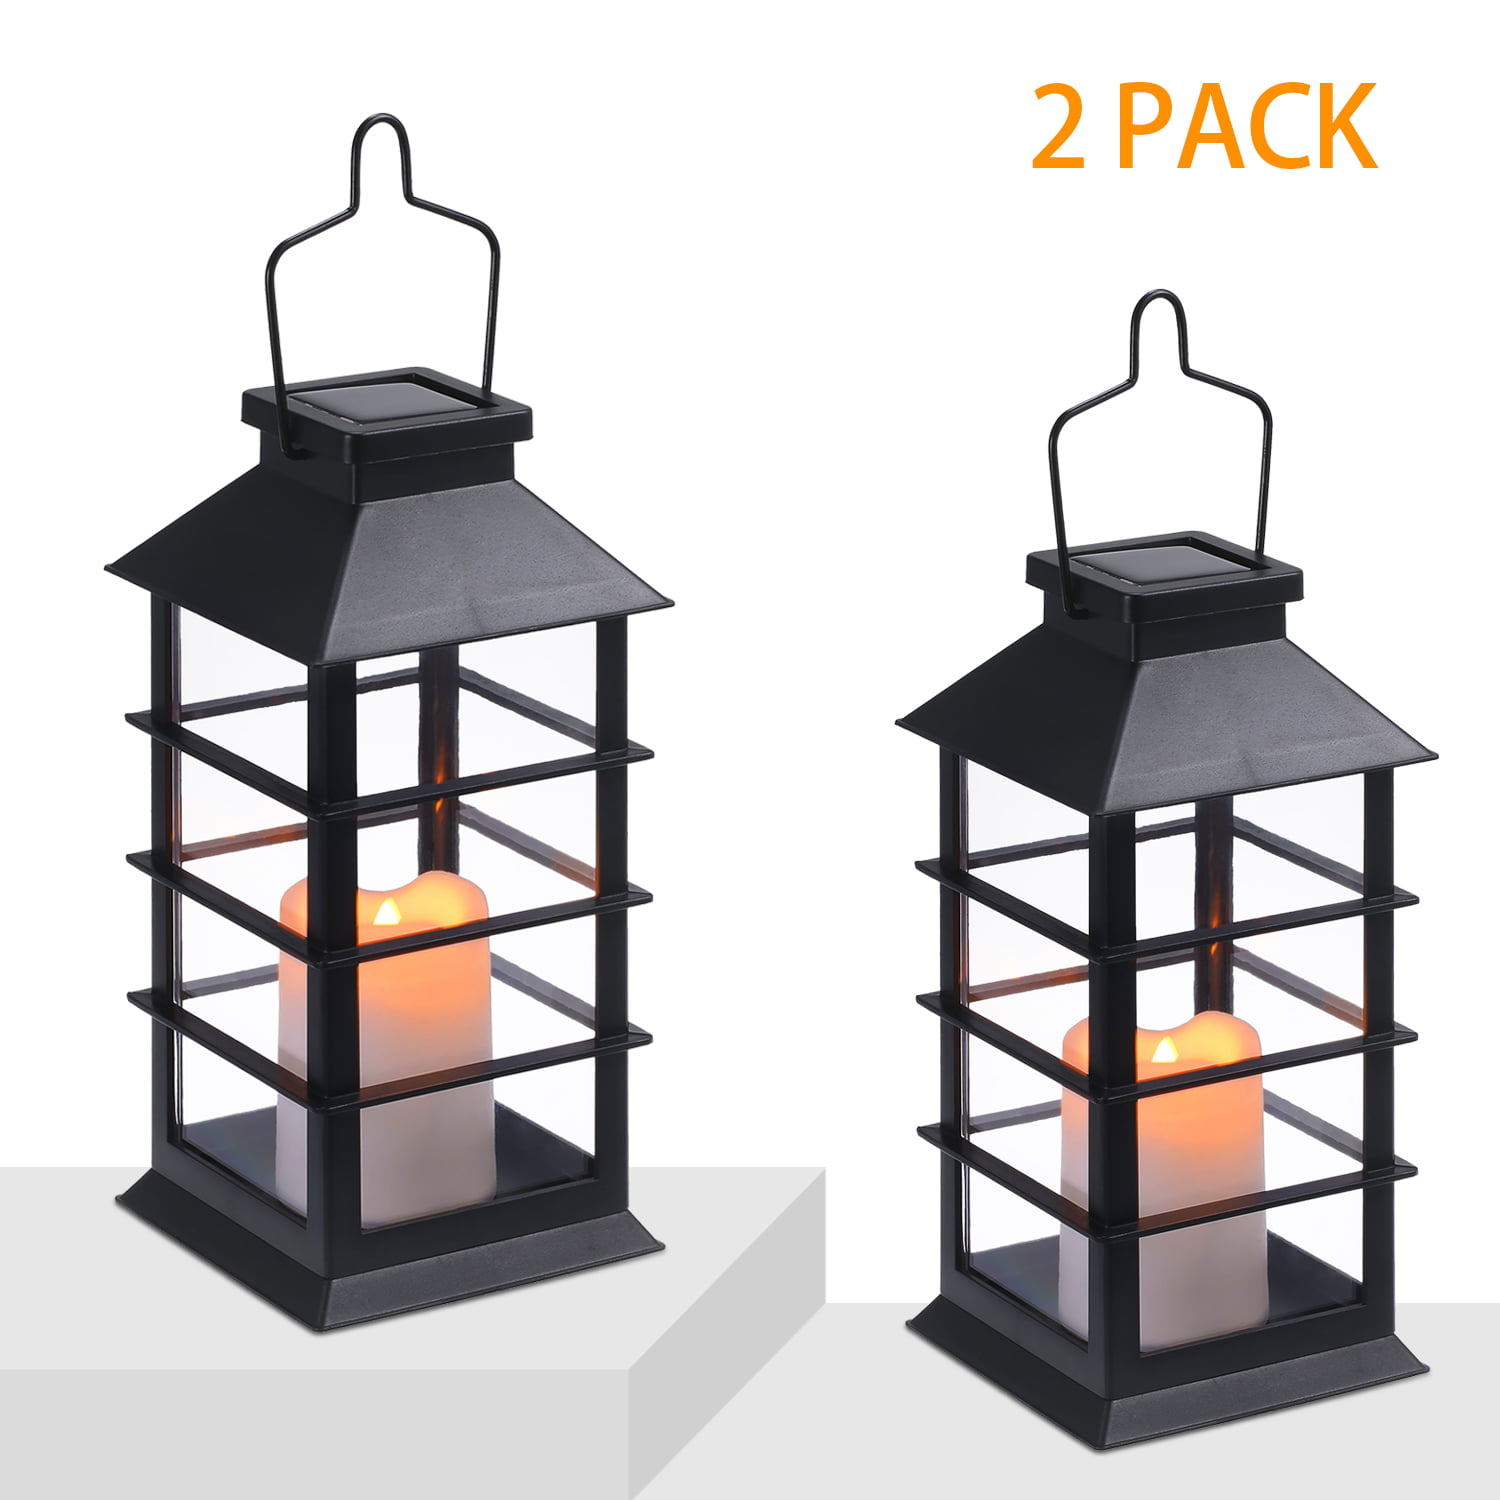 Solar Latern Hanging LED Solar Powered Lantern Solar Lights Outdoor Decorative for Patio Landscape Yard with Warm White Flameless Candles Flickering 4 Pack